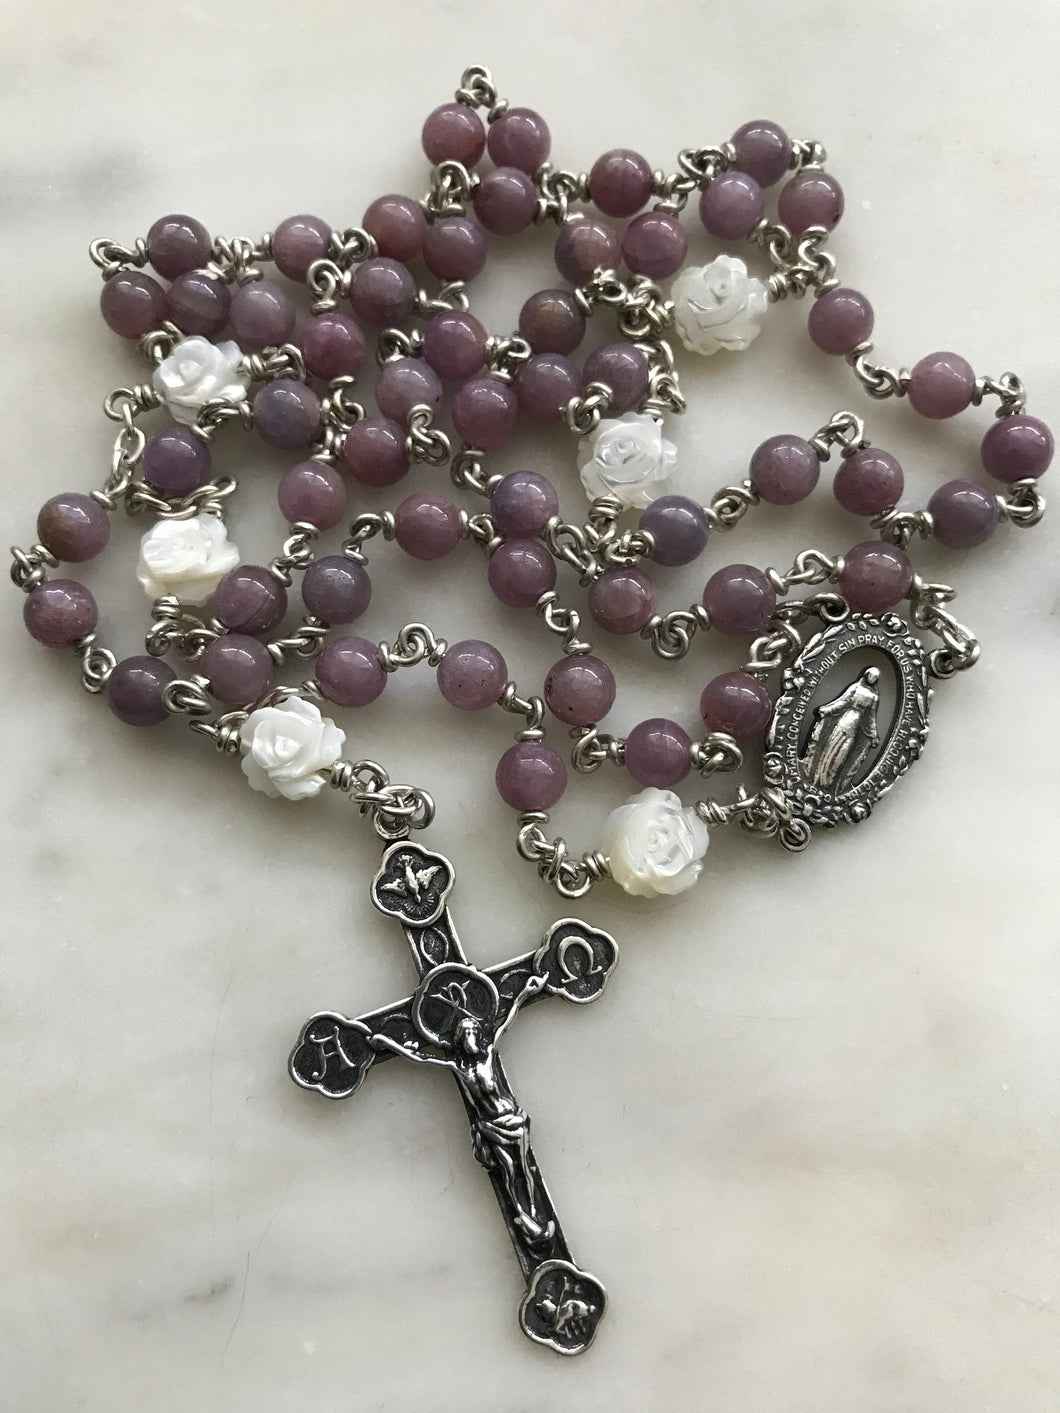 First Communion Rosary - Soft Pink Mauve Ruby Gemstones-Sterling Silver- Sacraments Crucifix